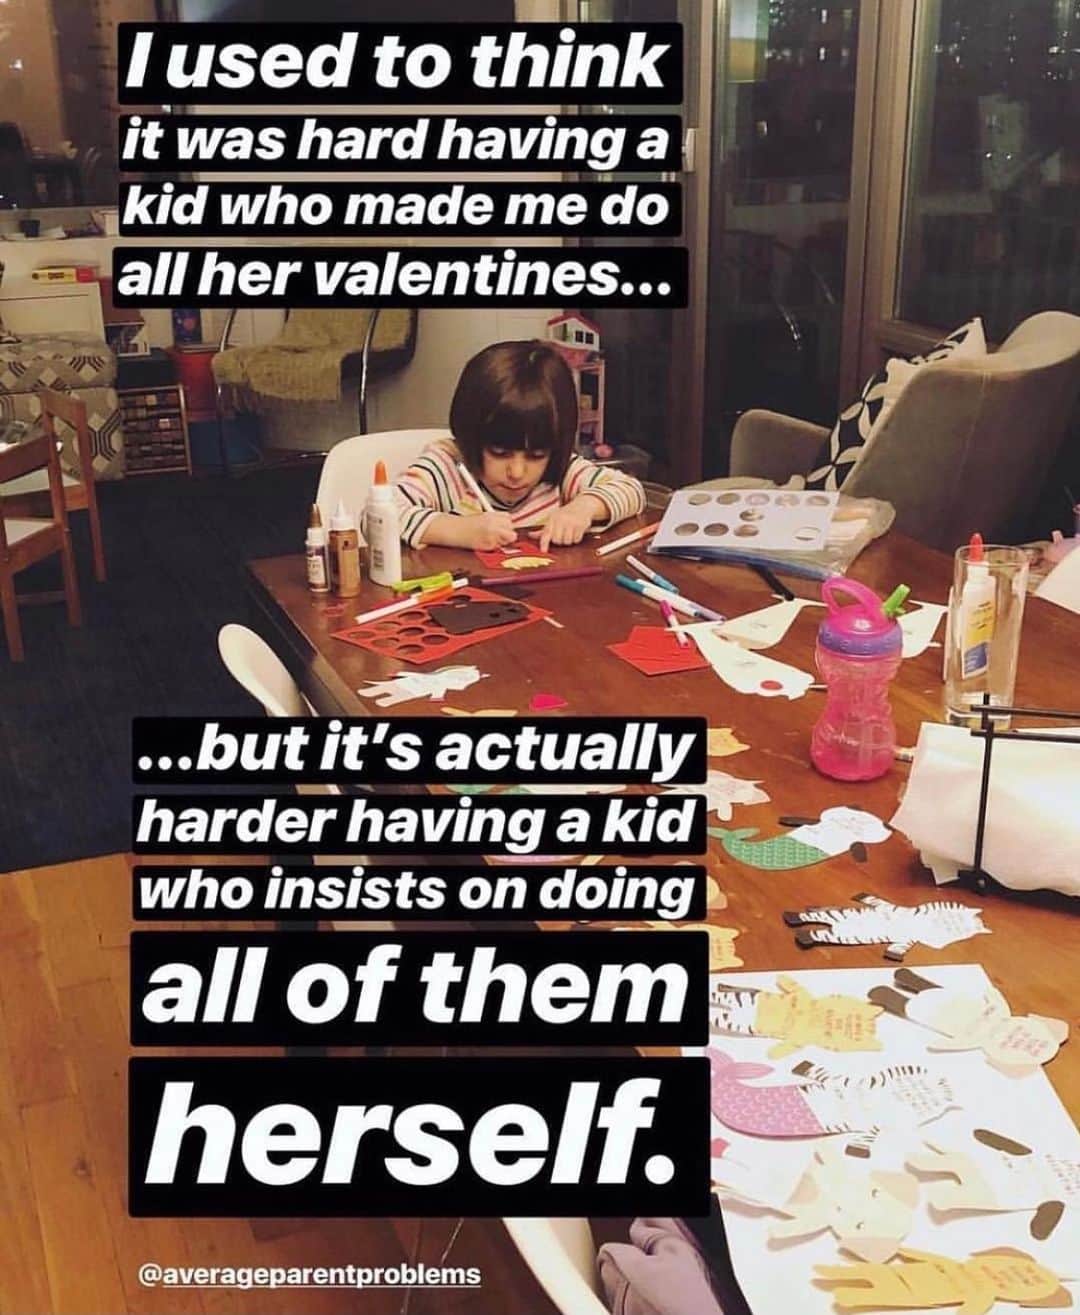 Average Parent Problemsのインスタグラム：「One plus side of not having a school Valentine's Day exchange this year is that there will be no last minute overly ambitious homemade Valentines to make that parents inevitably finish themselves after the kids go to bed. If you are planning on doing something extra for Valentine’s Day at home this year (I’ll take any excuse to elevate the mundane during a global pandemic!), I put together a Valentine’s Day gift guide with lots of small gift ideas for kids and adults, like a Love Stinks whoopee cushion, Luna Lovegood glasses, an 1000 piece chocolate jigsaw puzzle, and pink crocs with V-Day themed jibitz. Cute gift bags and decor ideas included! Link in bio.」